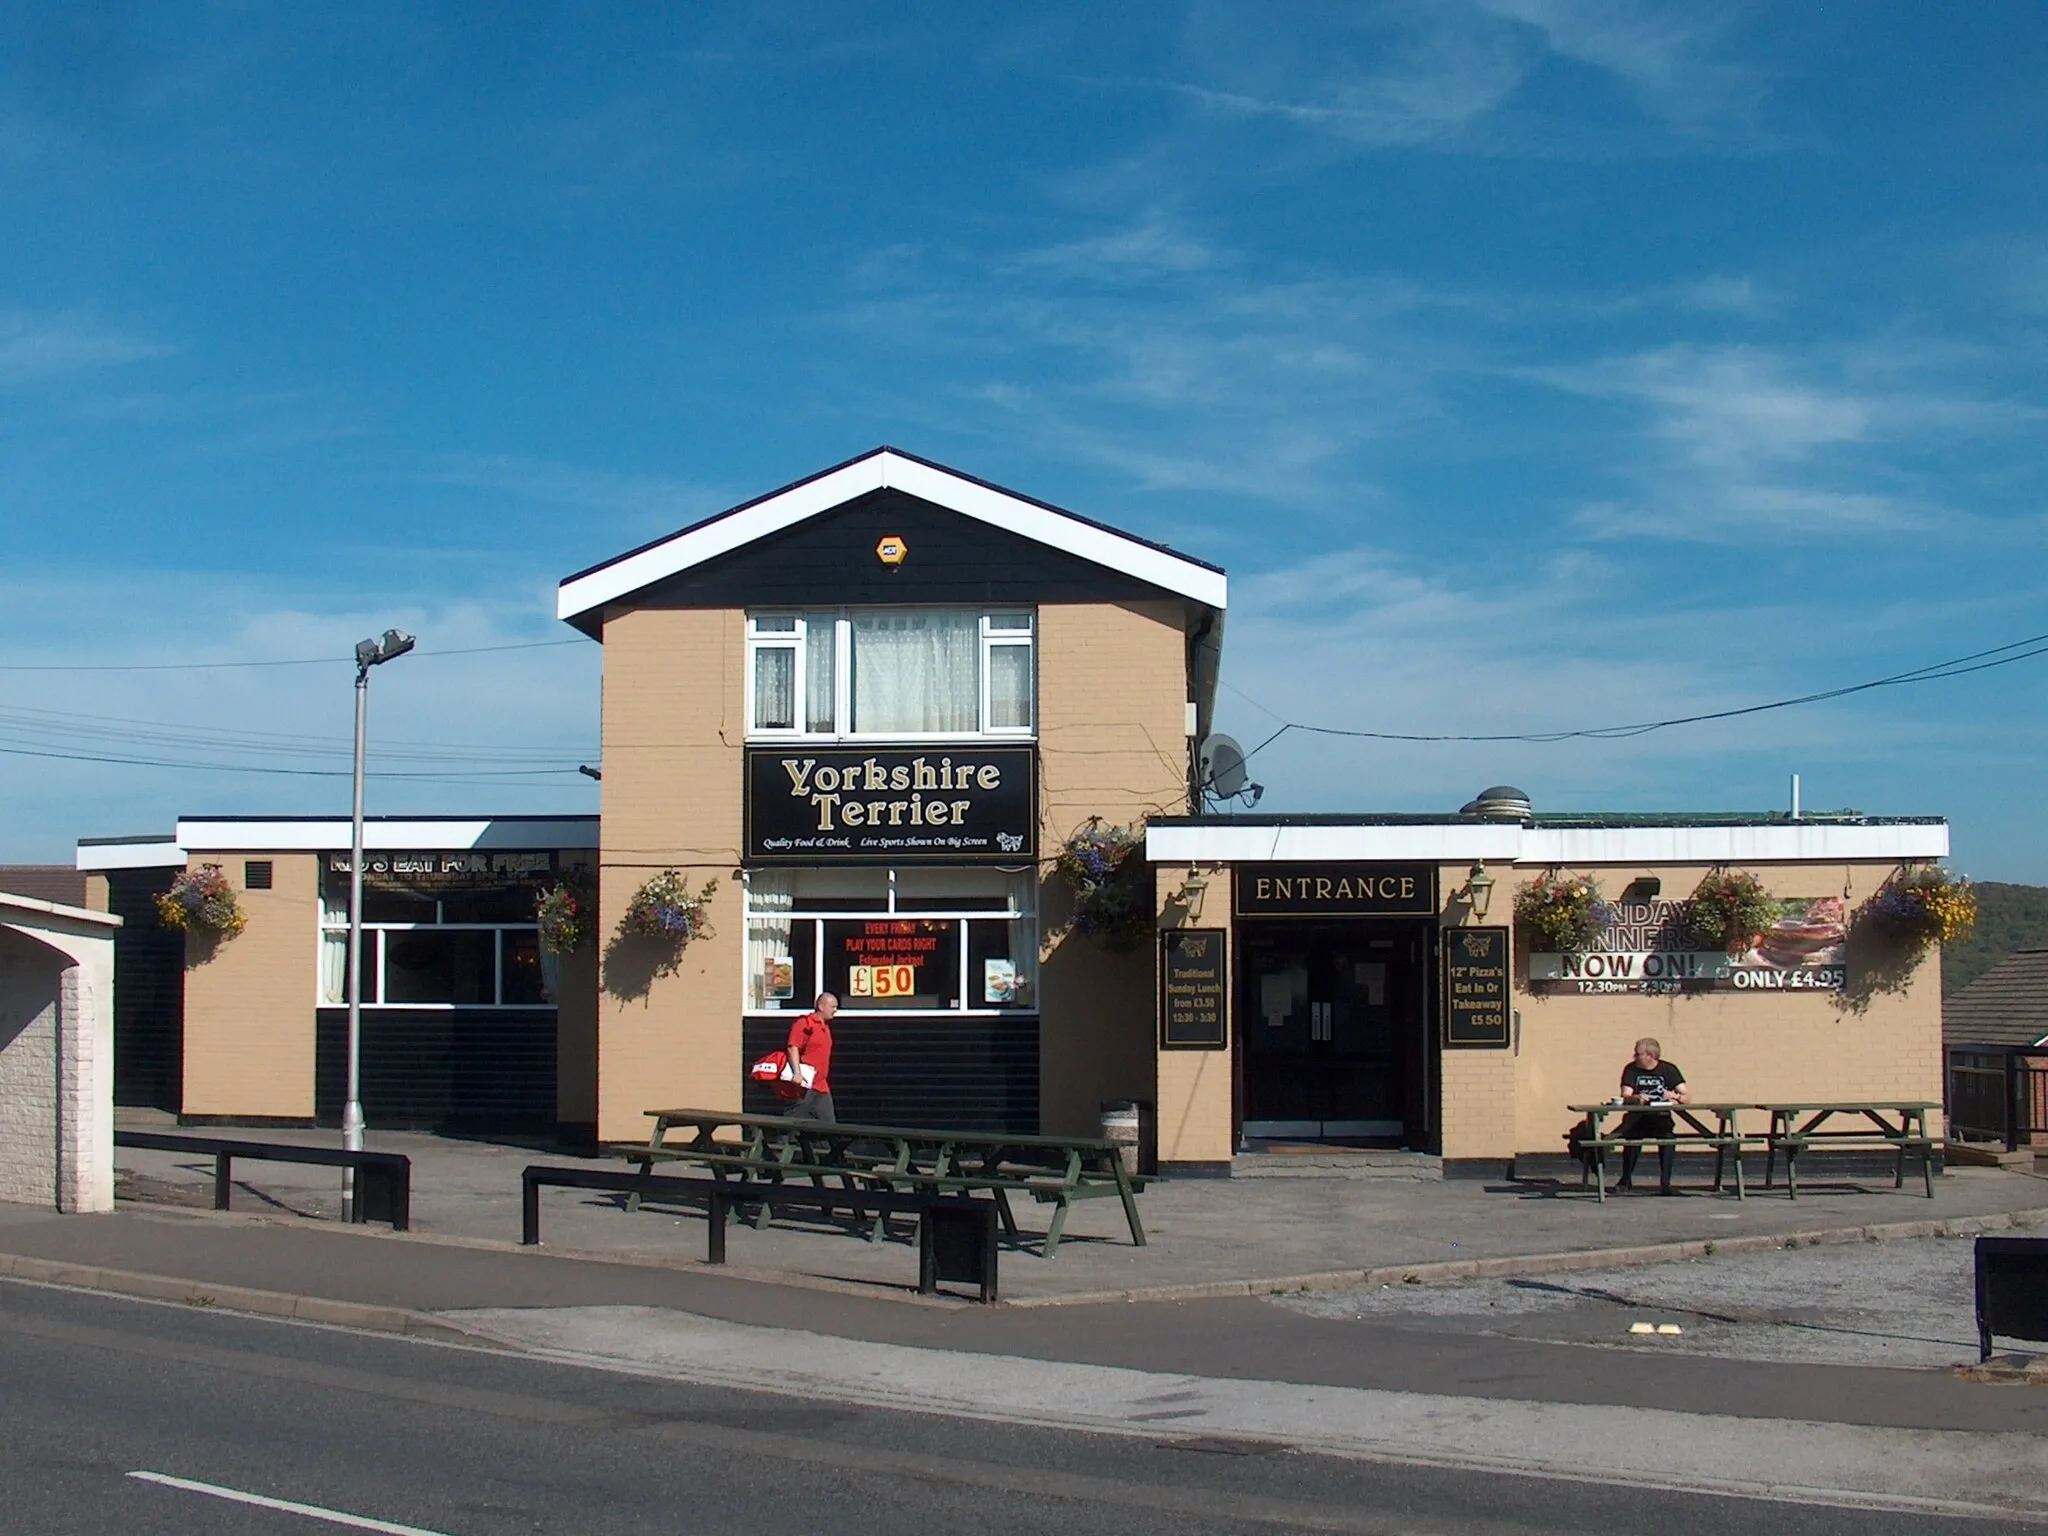 Photo showing: "The Yorkshire Terrier" public house, Brinsworth